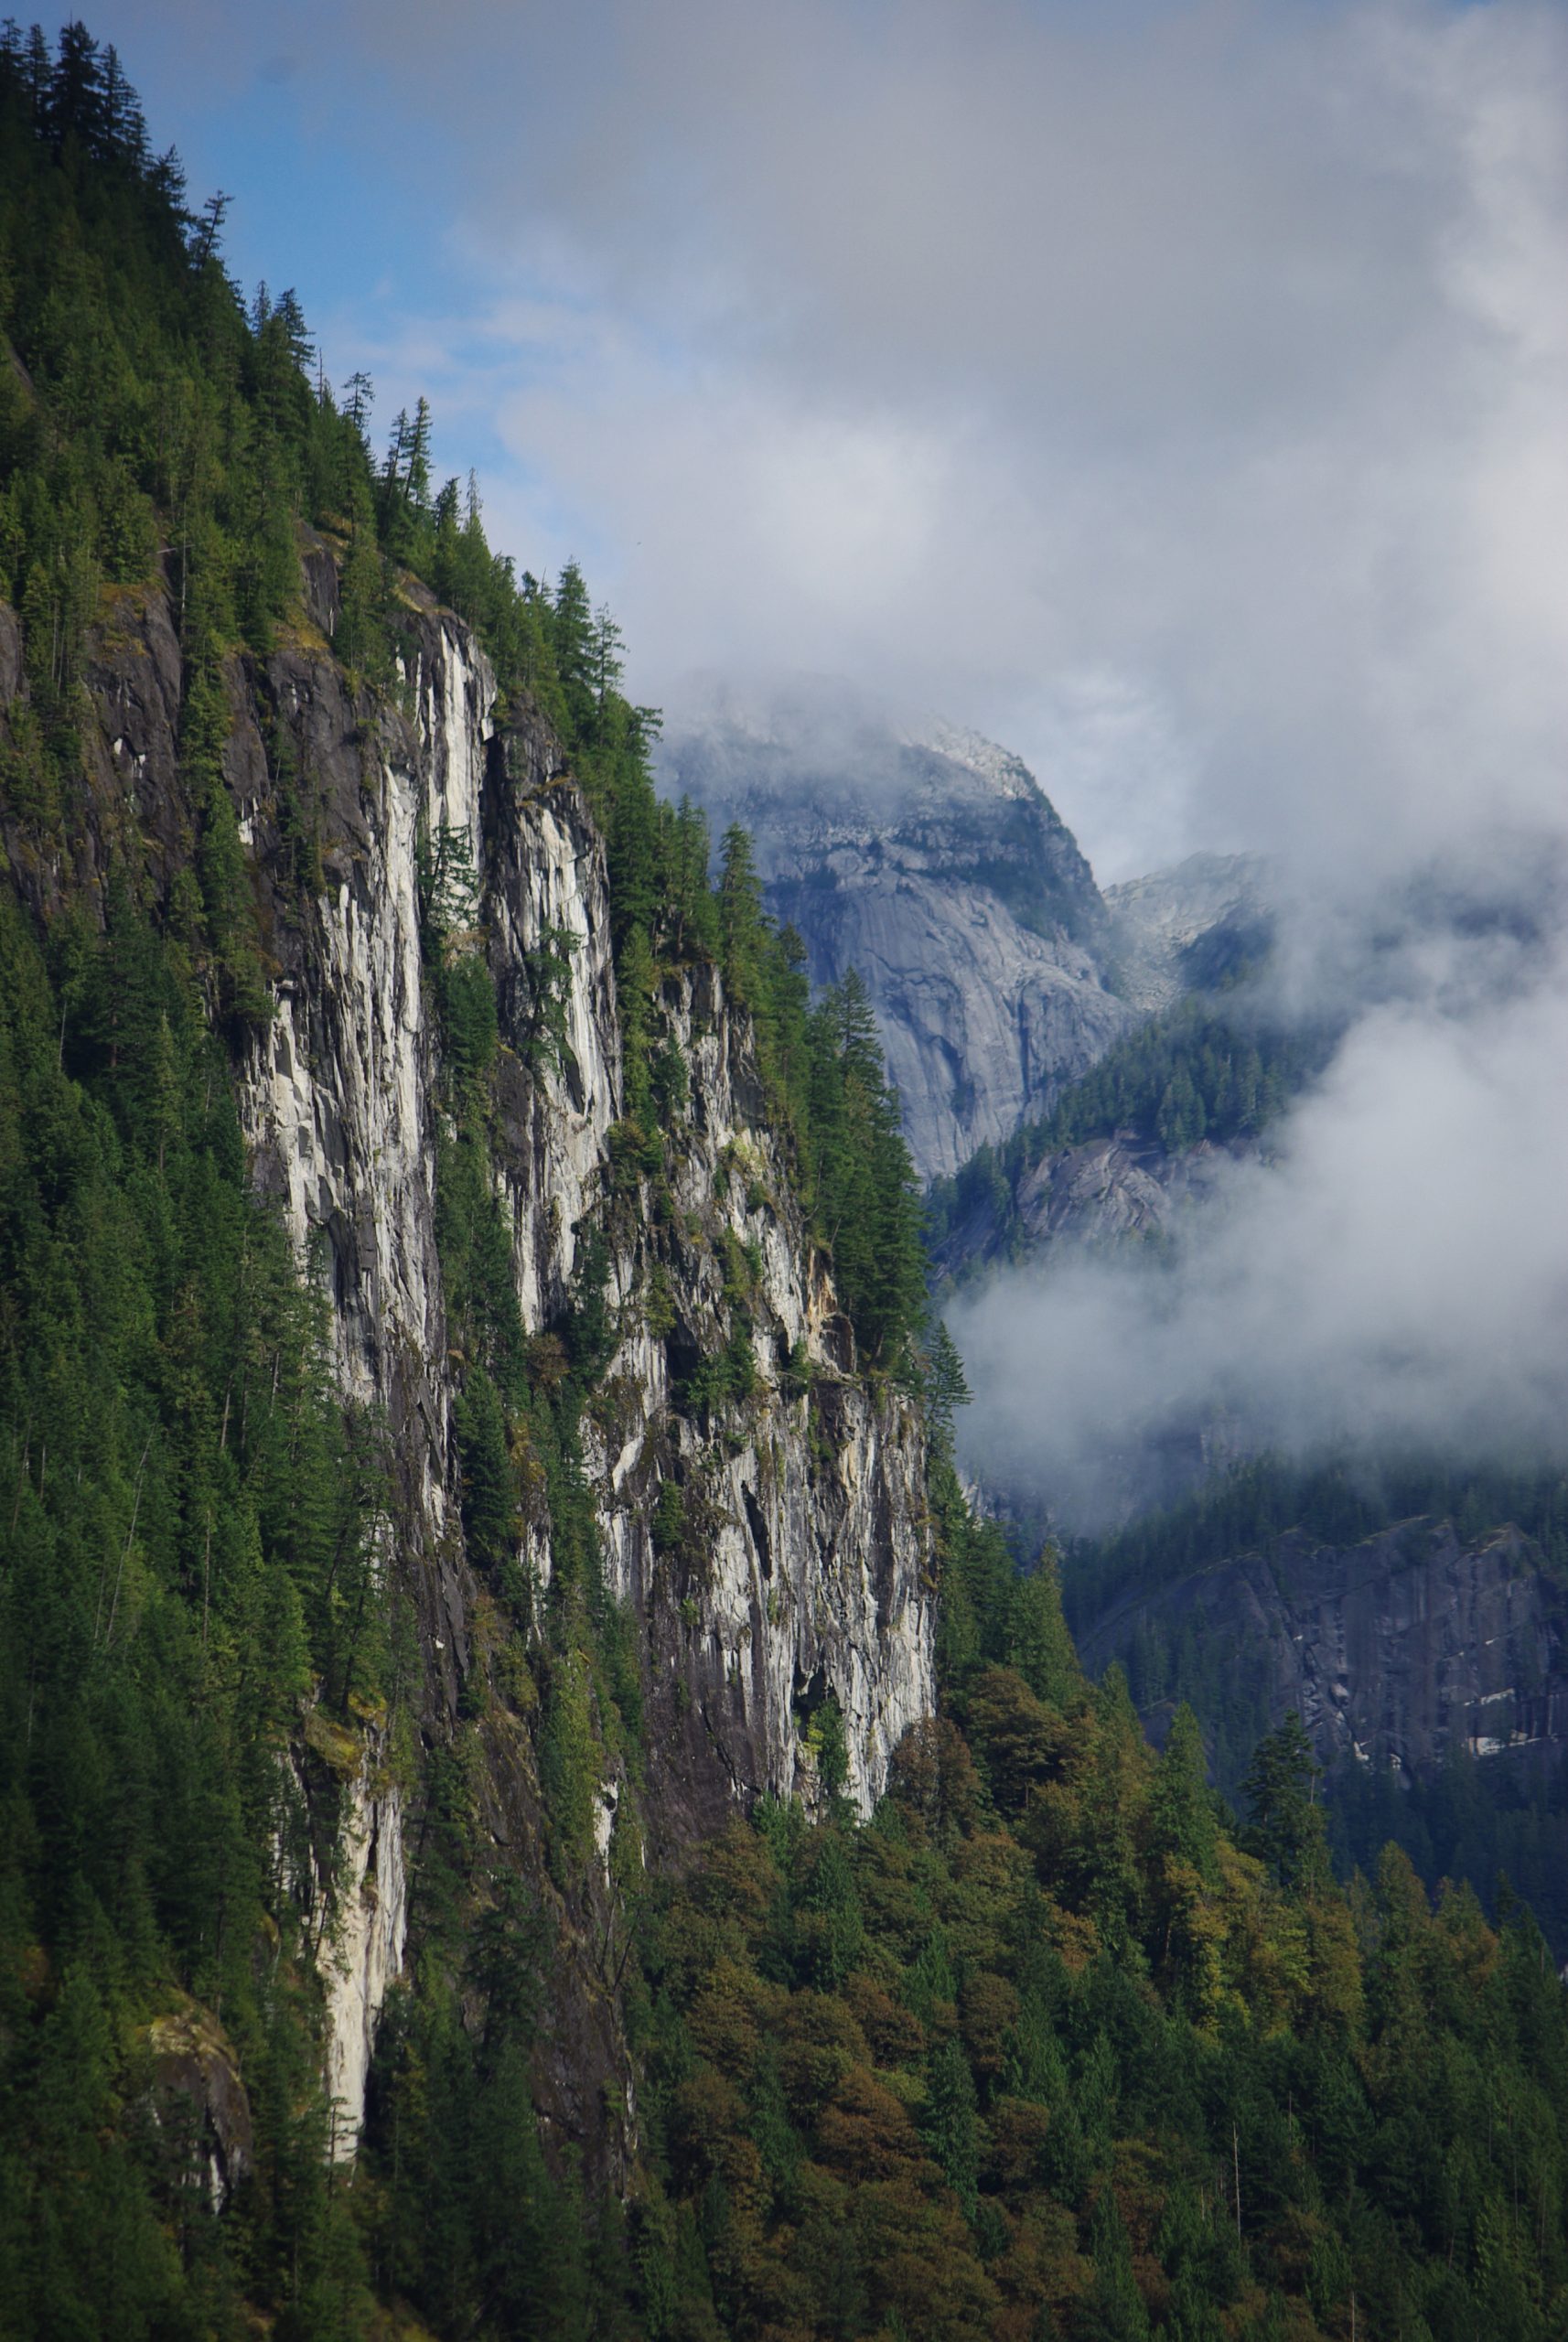 Steep cliff faces in Princess Louisa Inlet